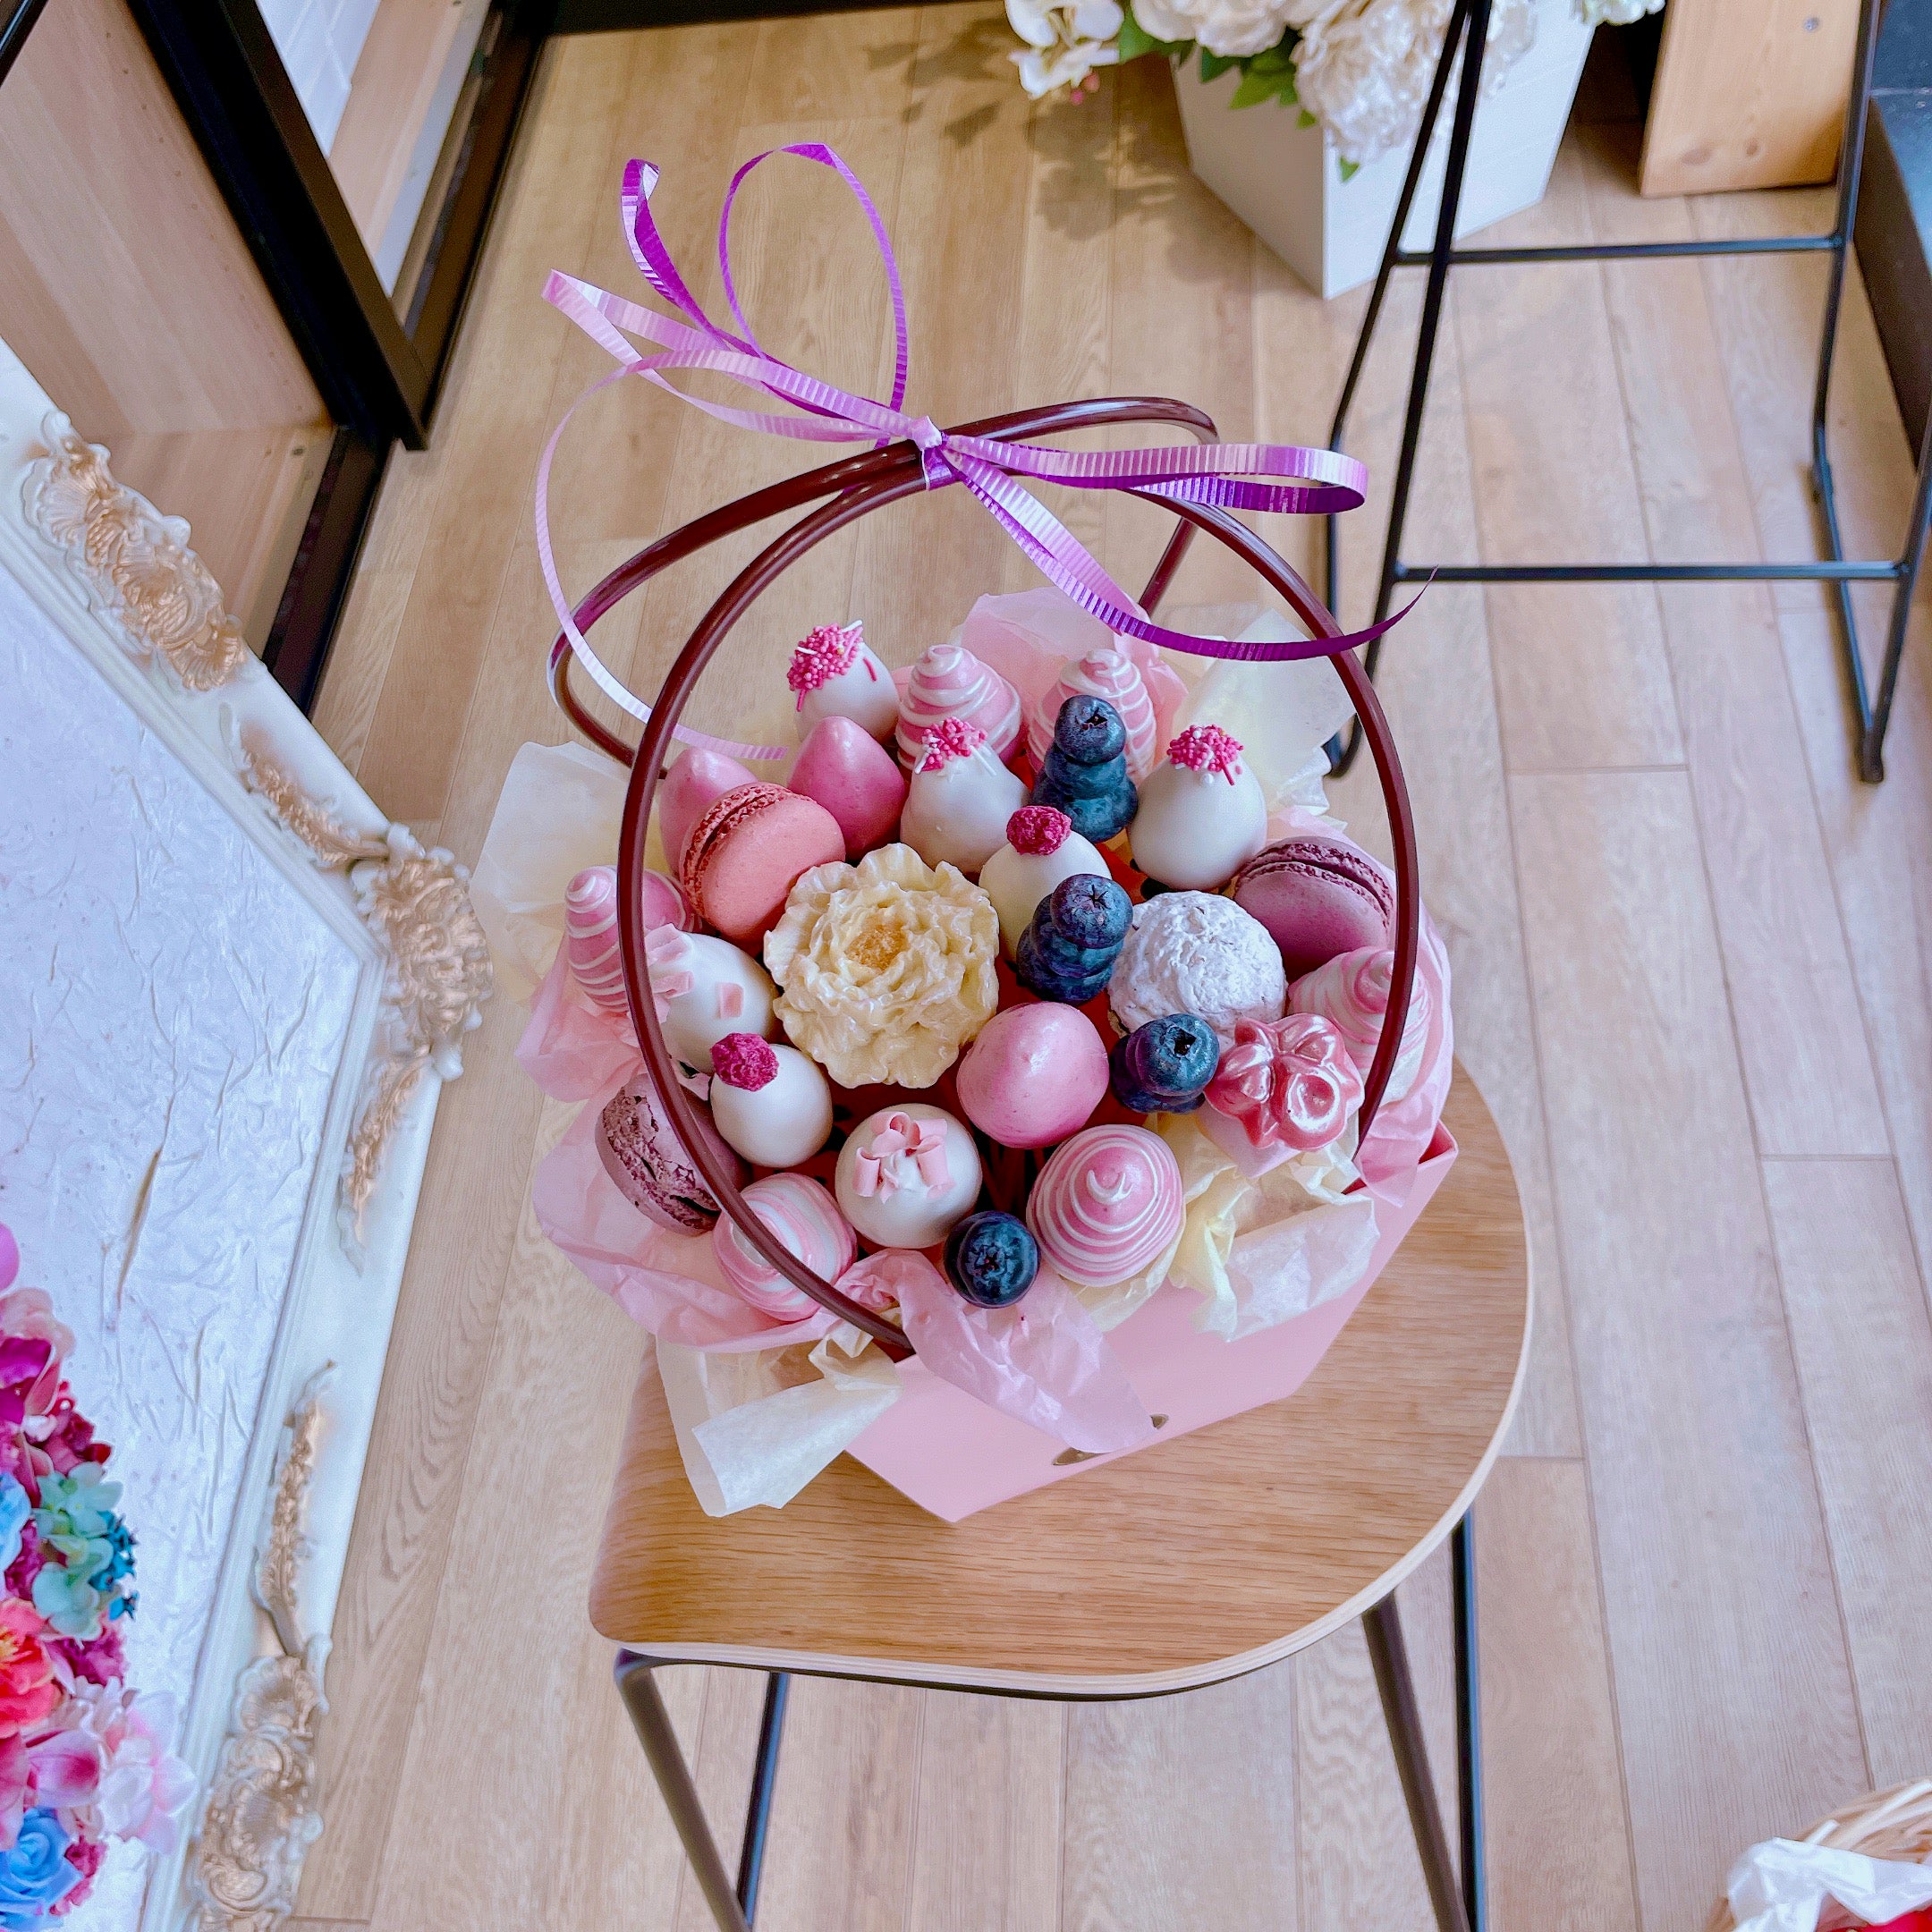 Chocolate dipped strawberries, macarons, and chocolate flowers basket